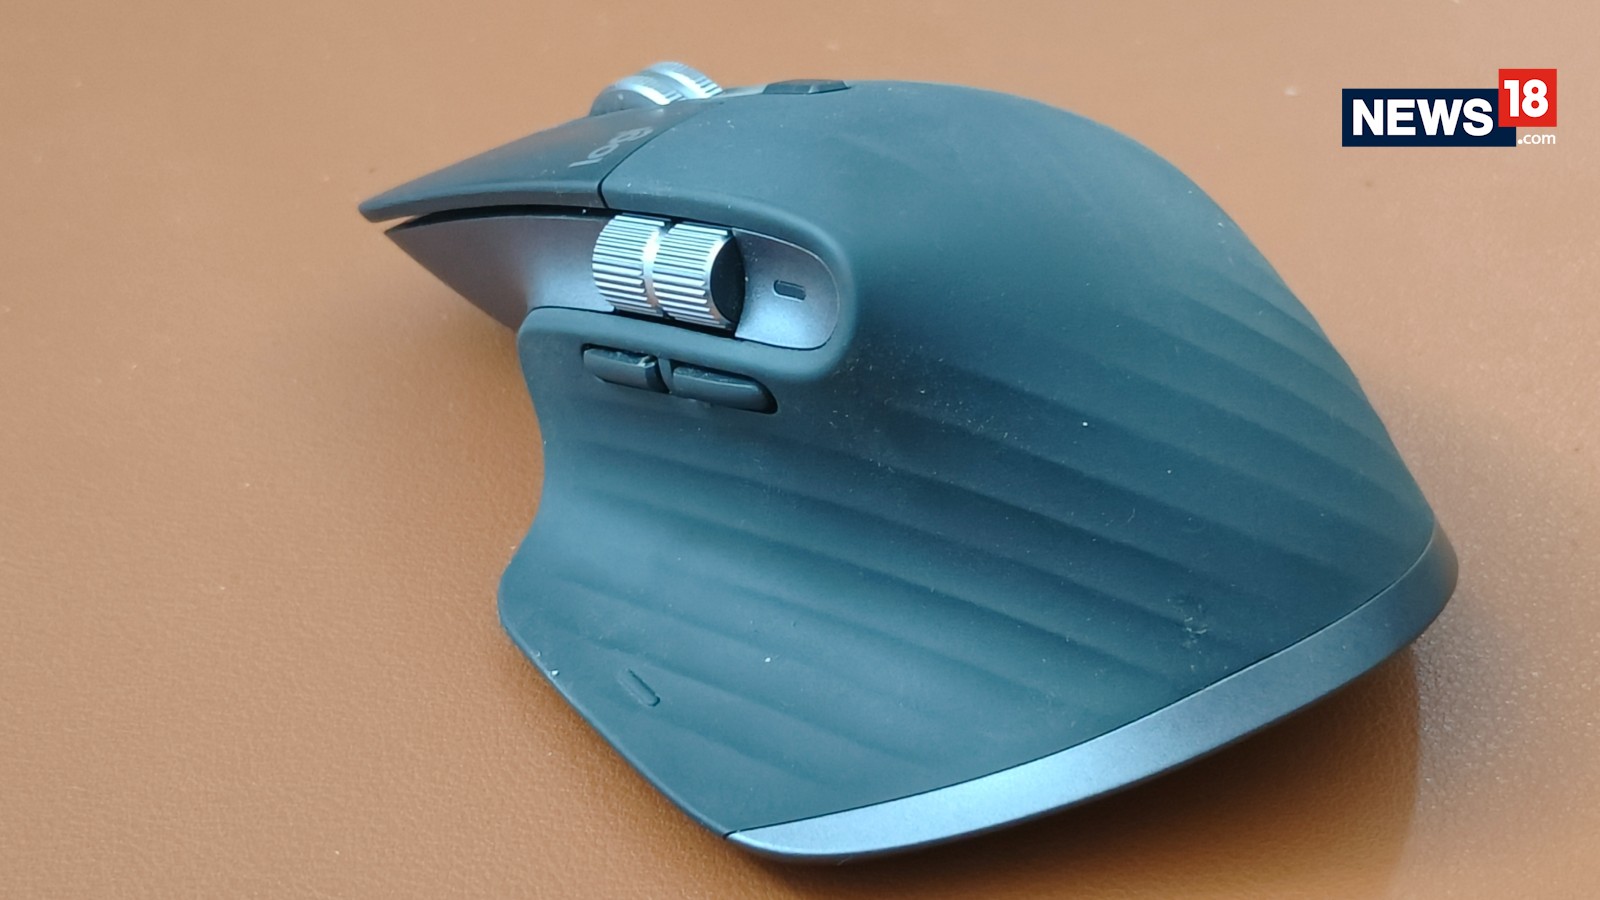 MX Mechanical A News18 Comfort Master And Keyboard 3S Mouse - MX Logitech At Review: Premium